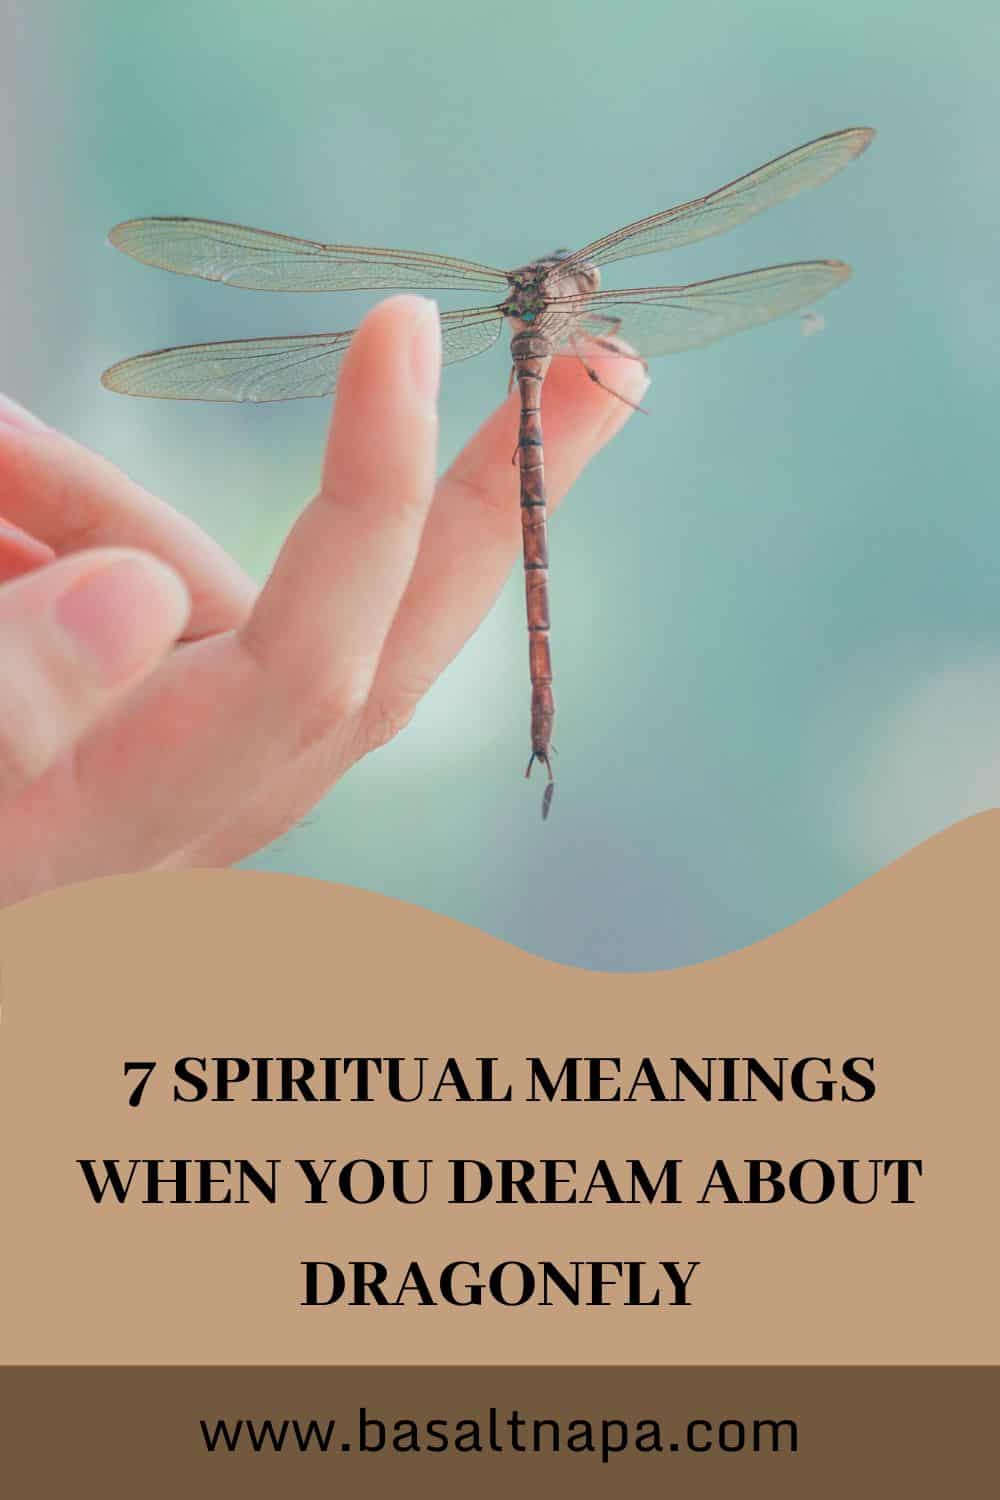 7 Spiritual Meanings When You Dream About Dragonfly